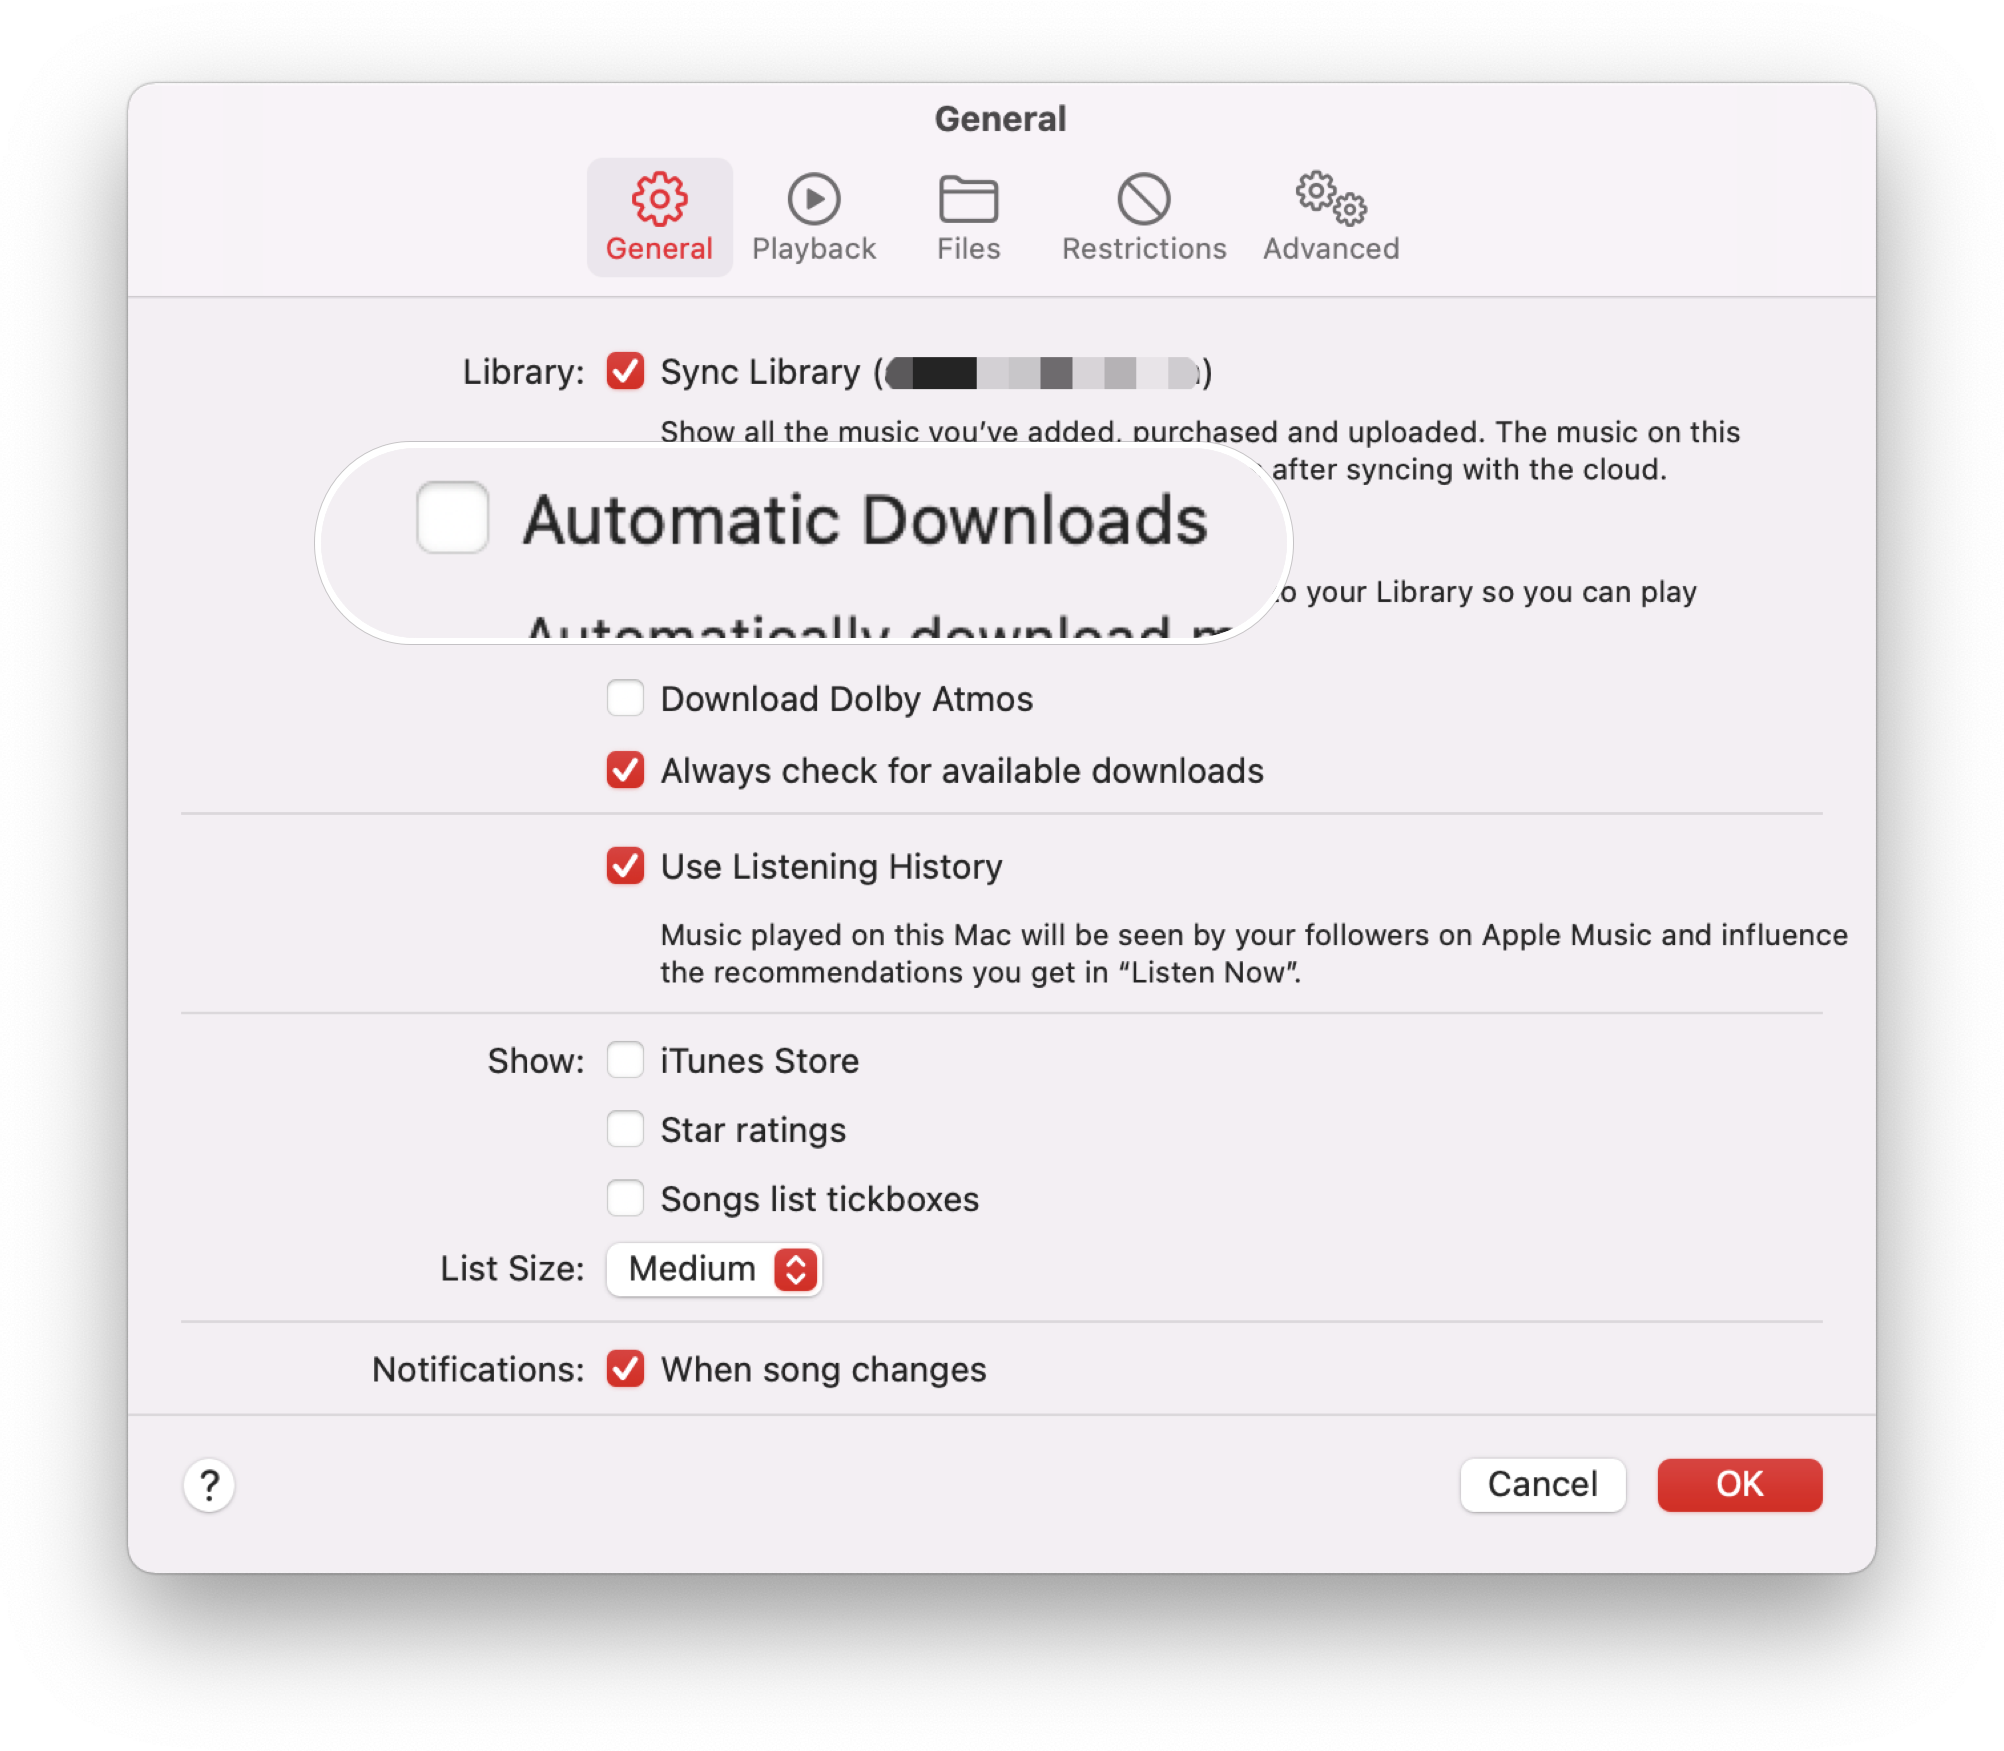 Set up automatic downloading by showing: Check the box for Automatic Downloads